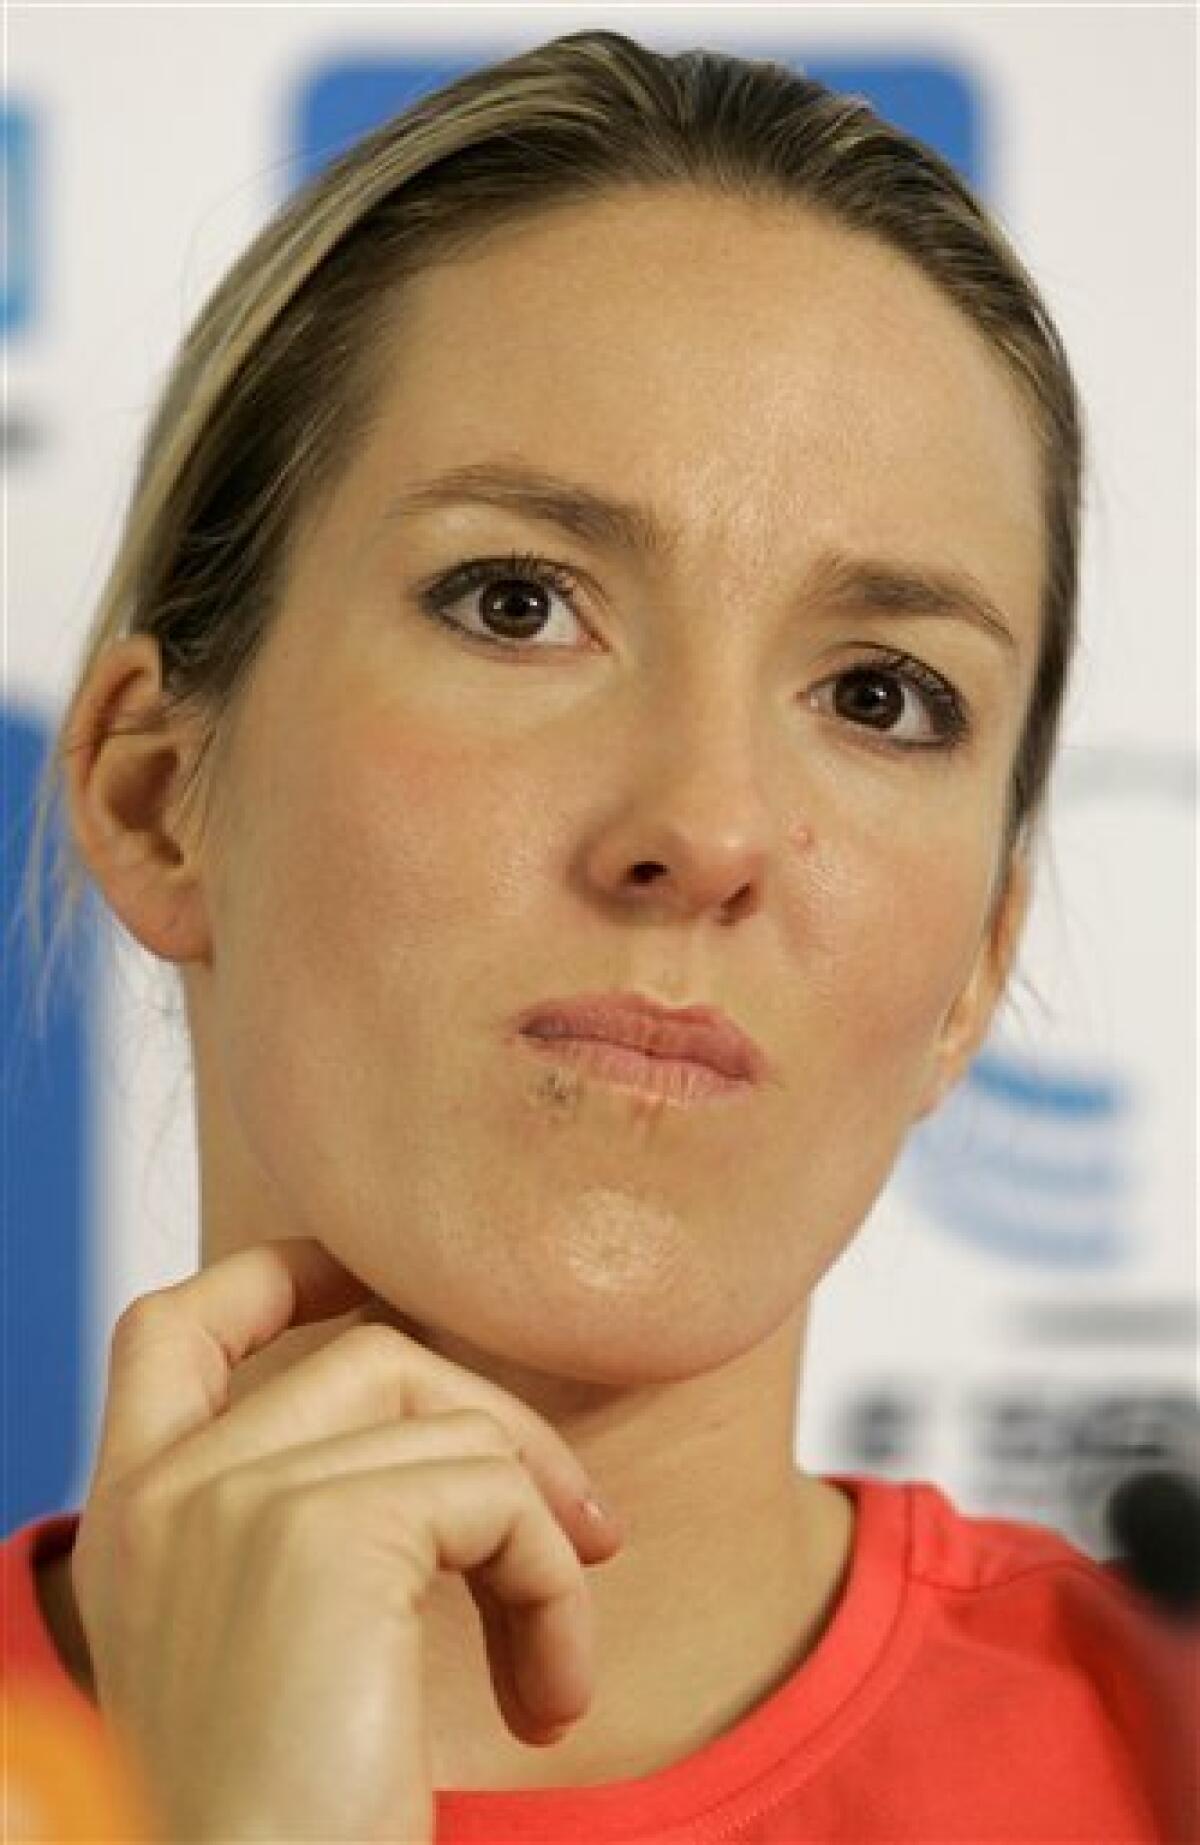 Belgium's Justine Henin, seen at a media conference, in Limelette, Belgium, Wednesday Sept. 23, 2009. Former No. 1 Justine Henin has announced her return to competitive tennis for next year. Henin had been retired for just over a year, but at 27 she says has the fire and physical strength to compete for an eighth Grand Slam title. (AP Photo/Yves Logghe)